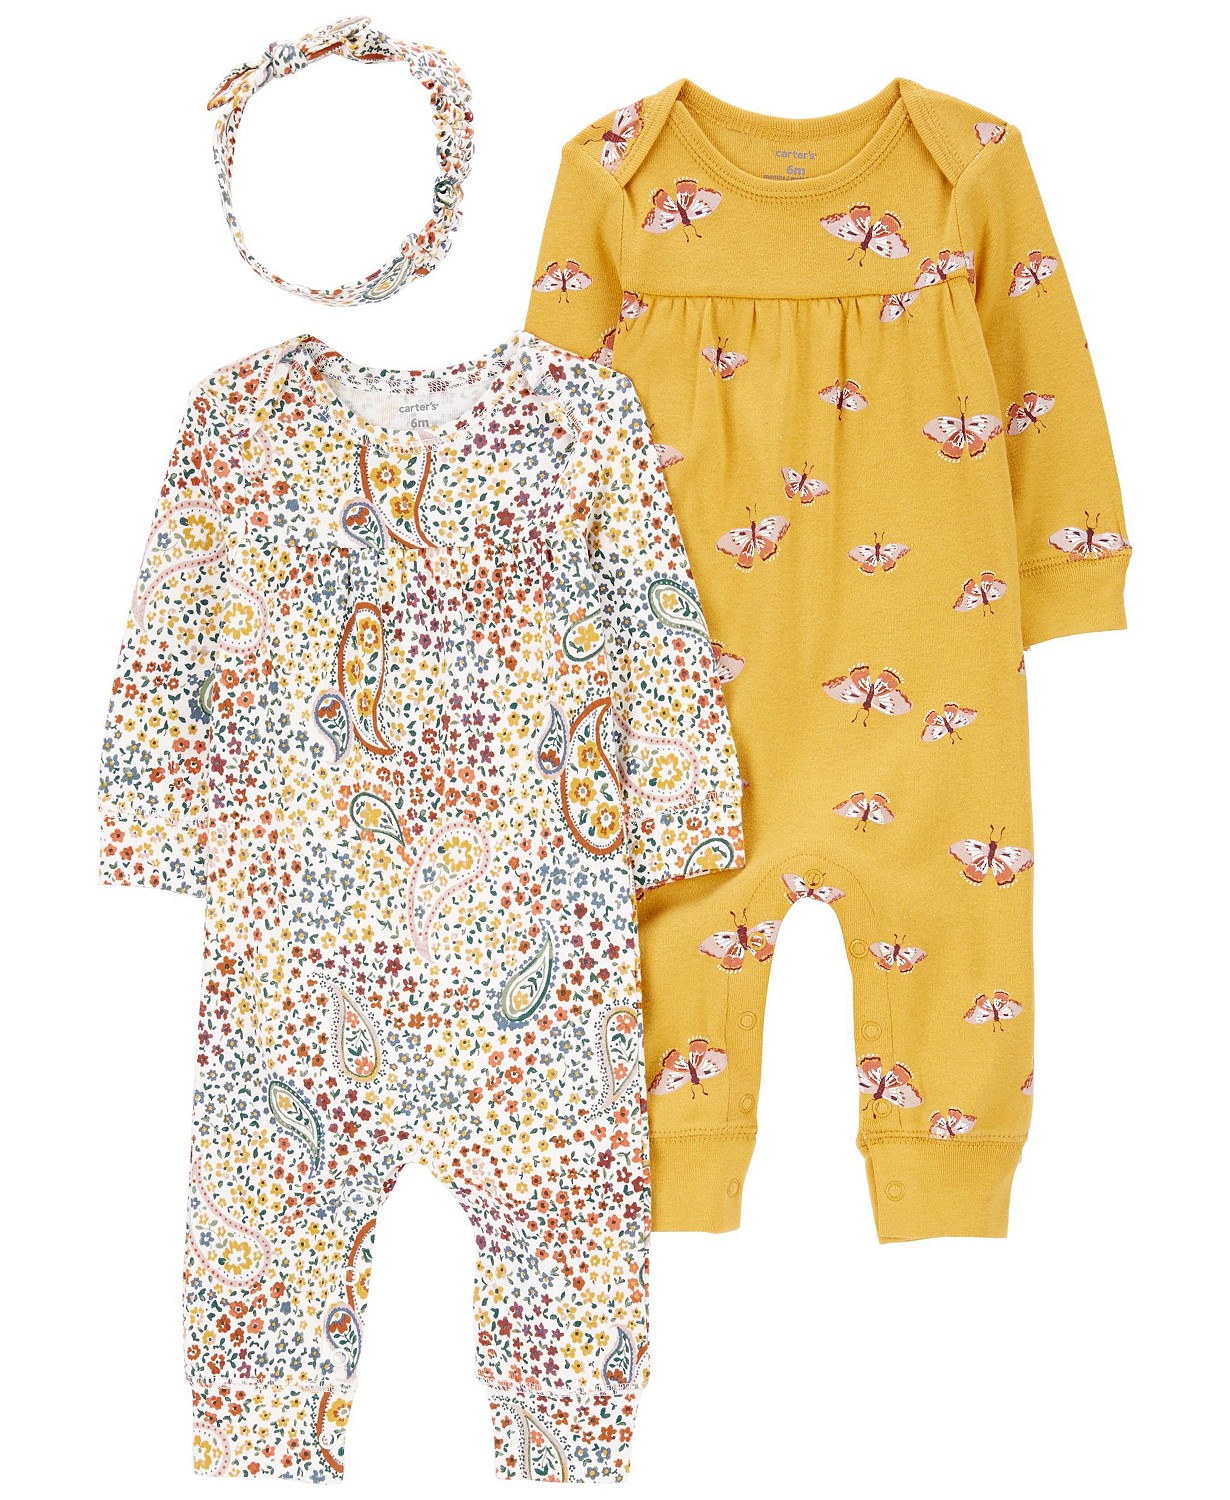 Baby Girls Footless Coveralls and Headband 3 Piece Set